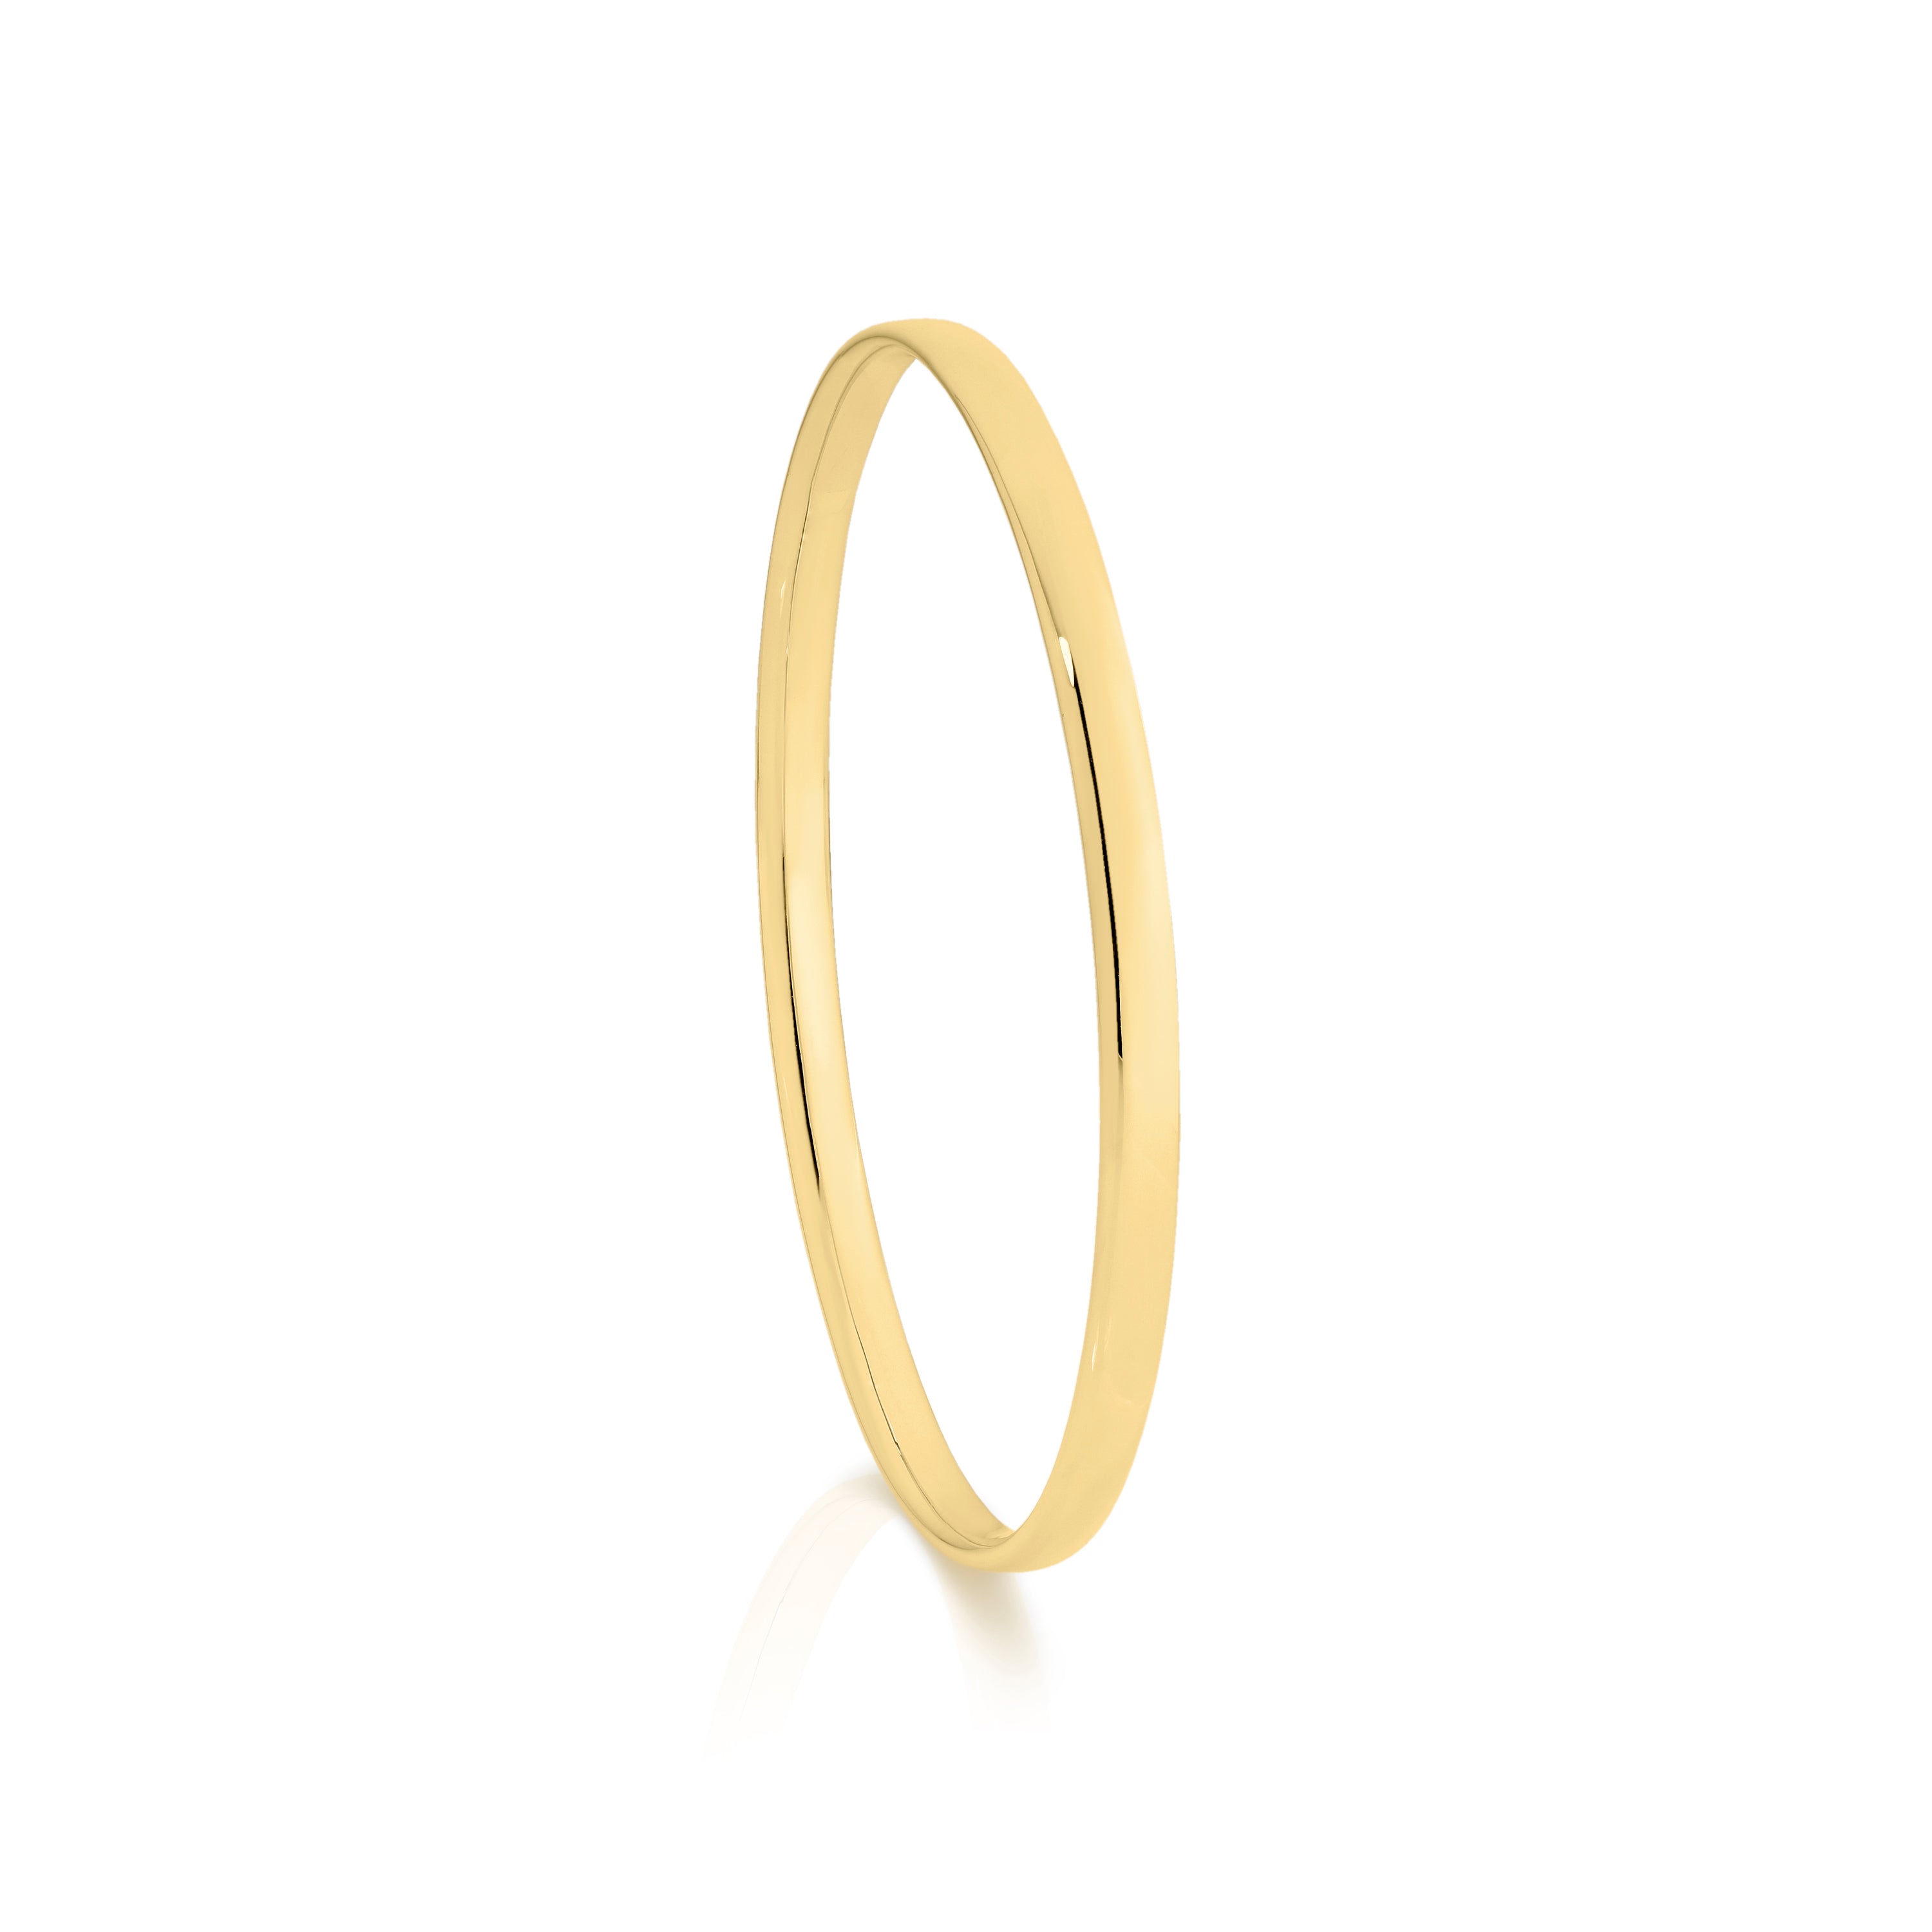 9ct gold 4mm oval bangle